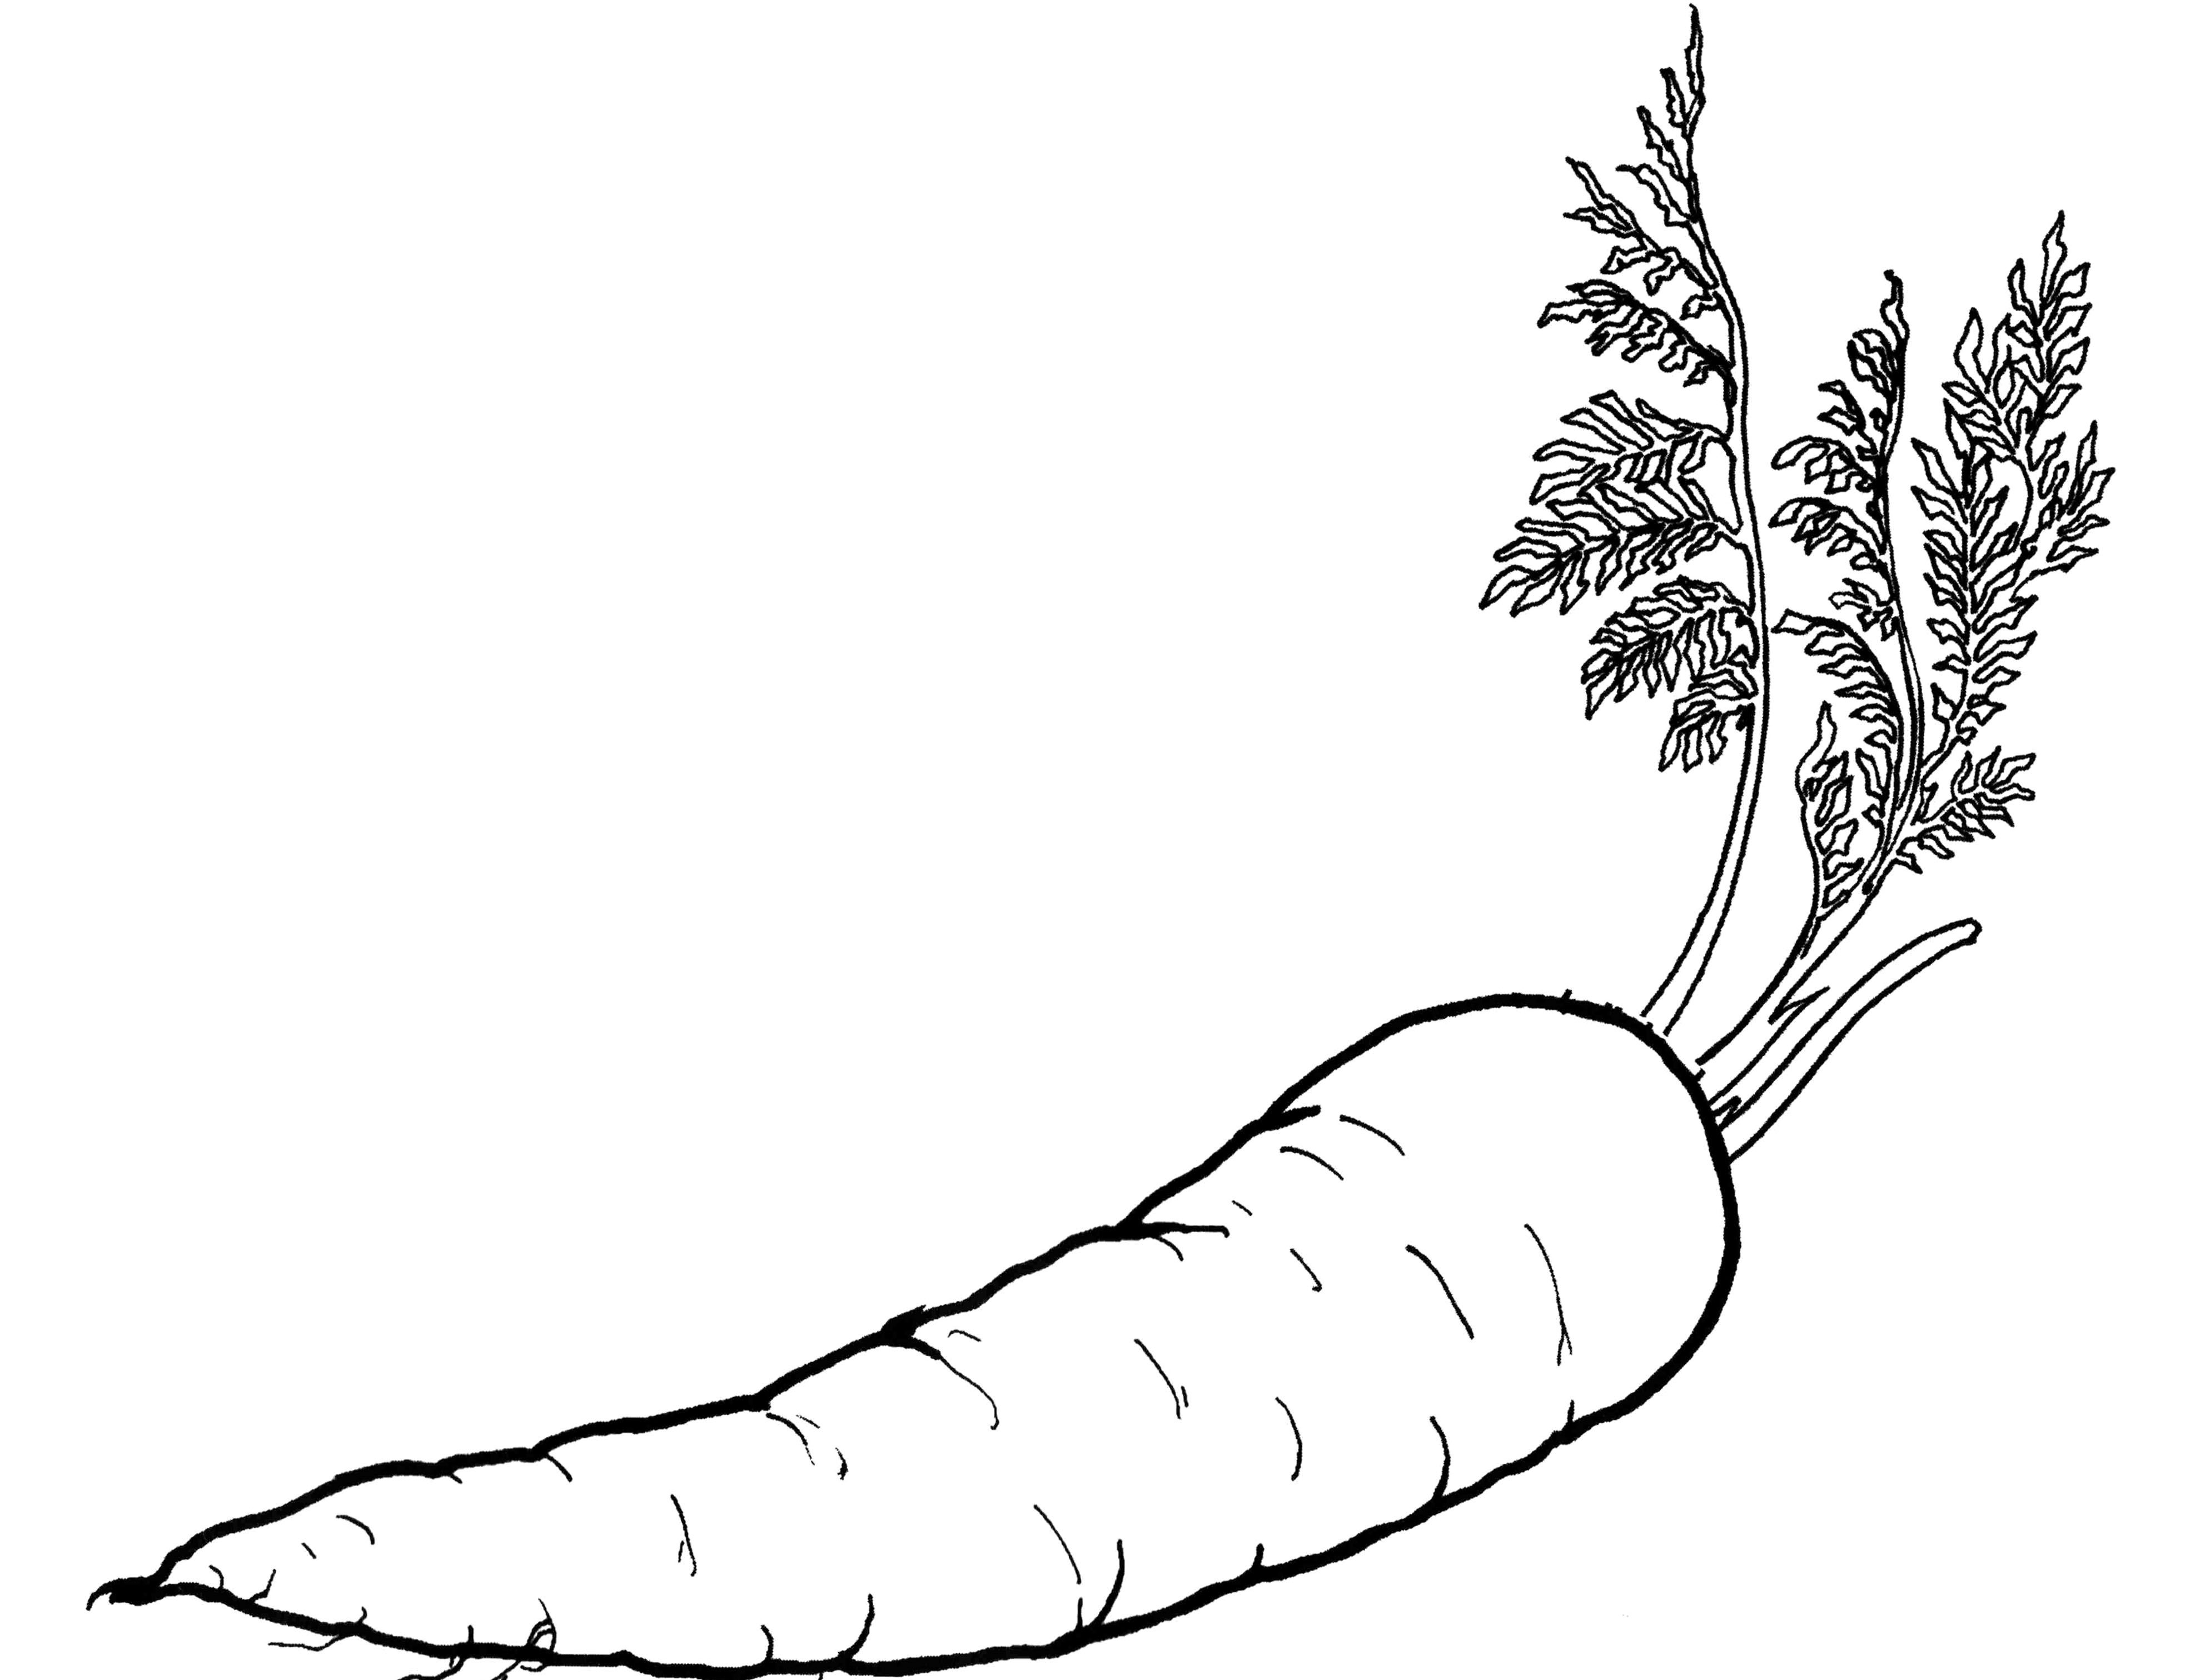 Chinese Vegetable Coloring Page - Coloring Pages For All Ages